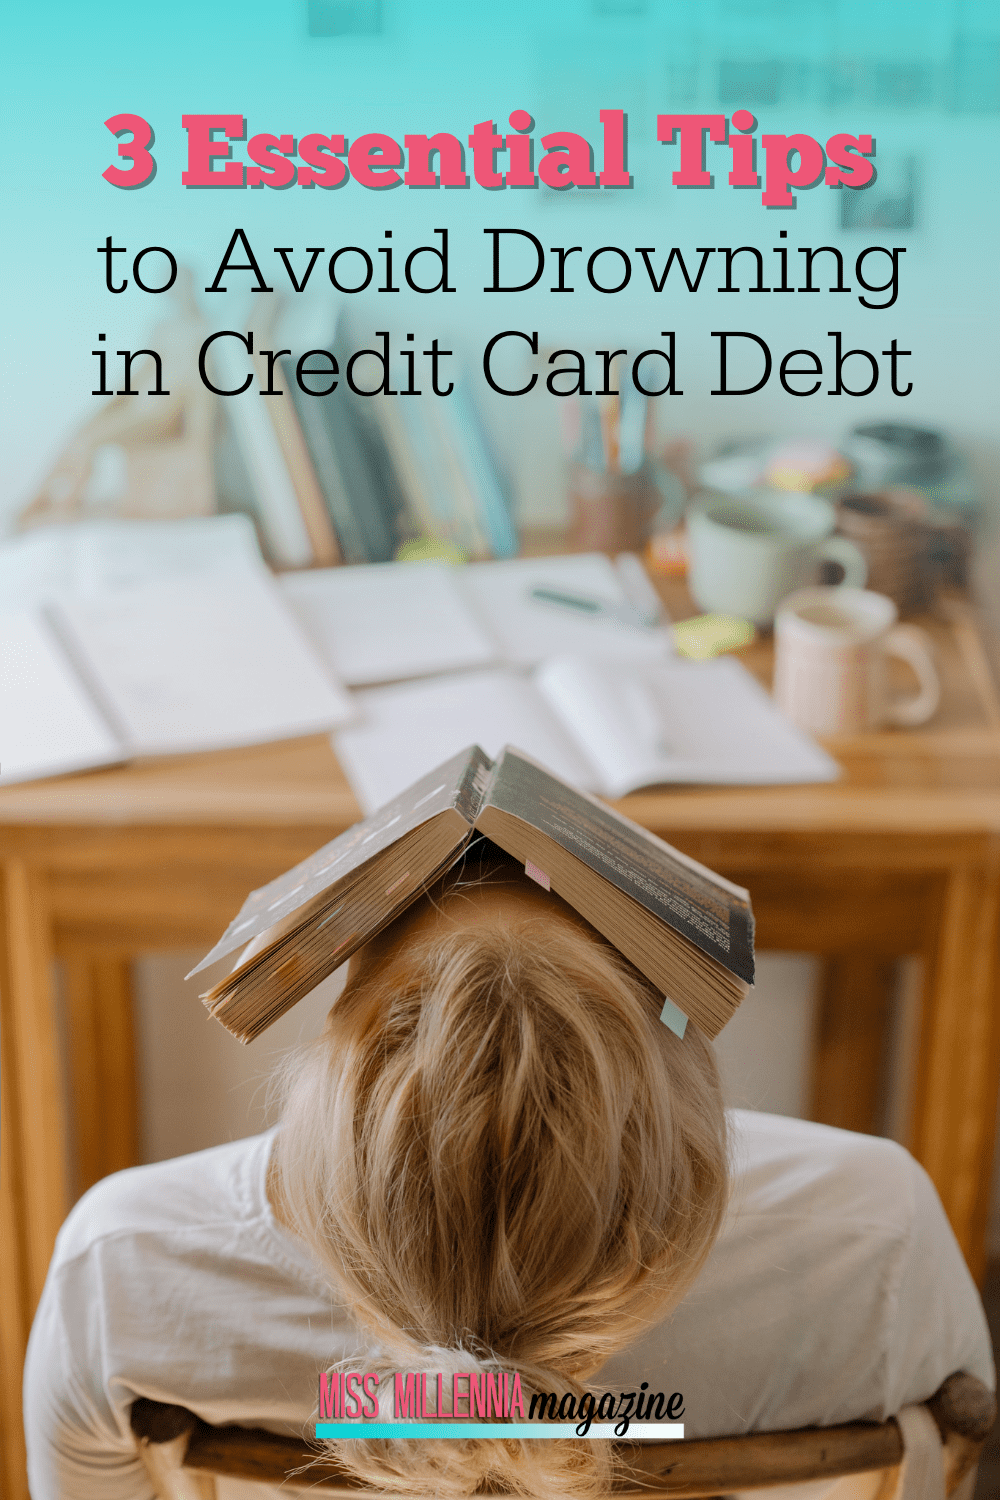 3 Essential Tips to Avoid Drowning in Credit Card Debt